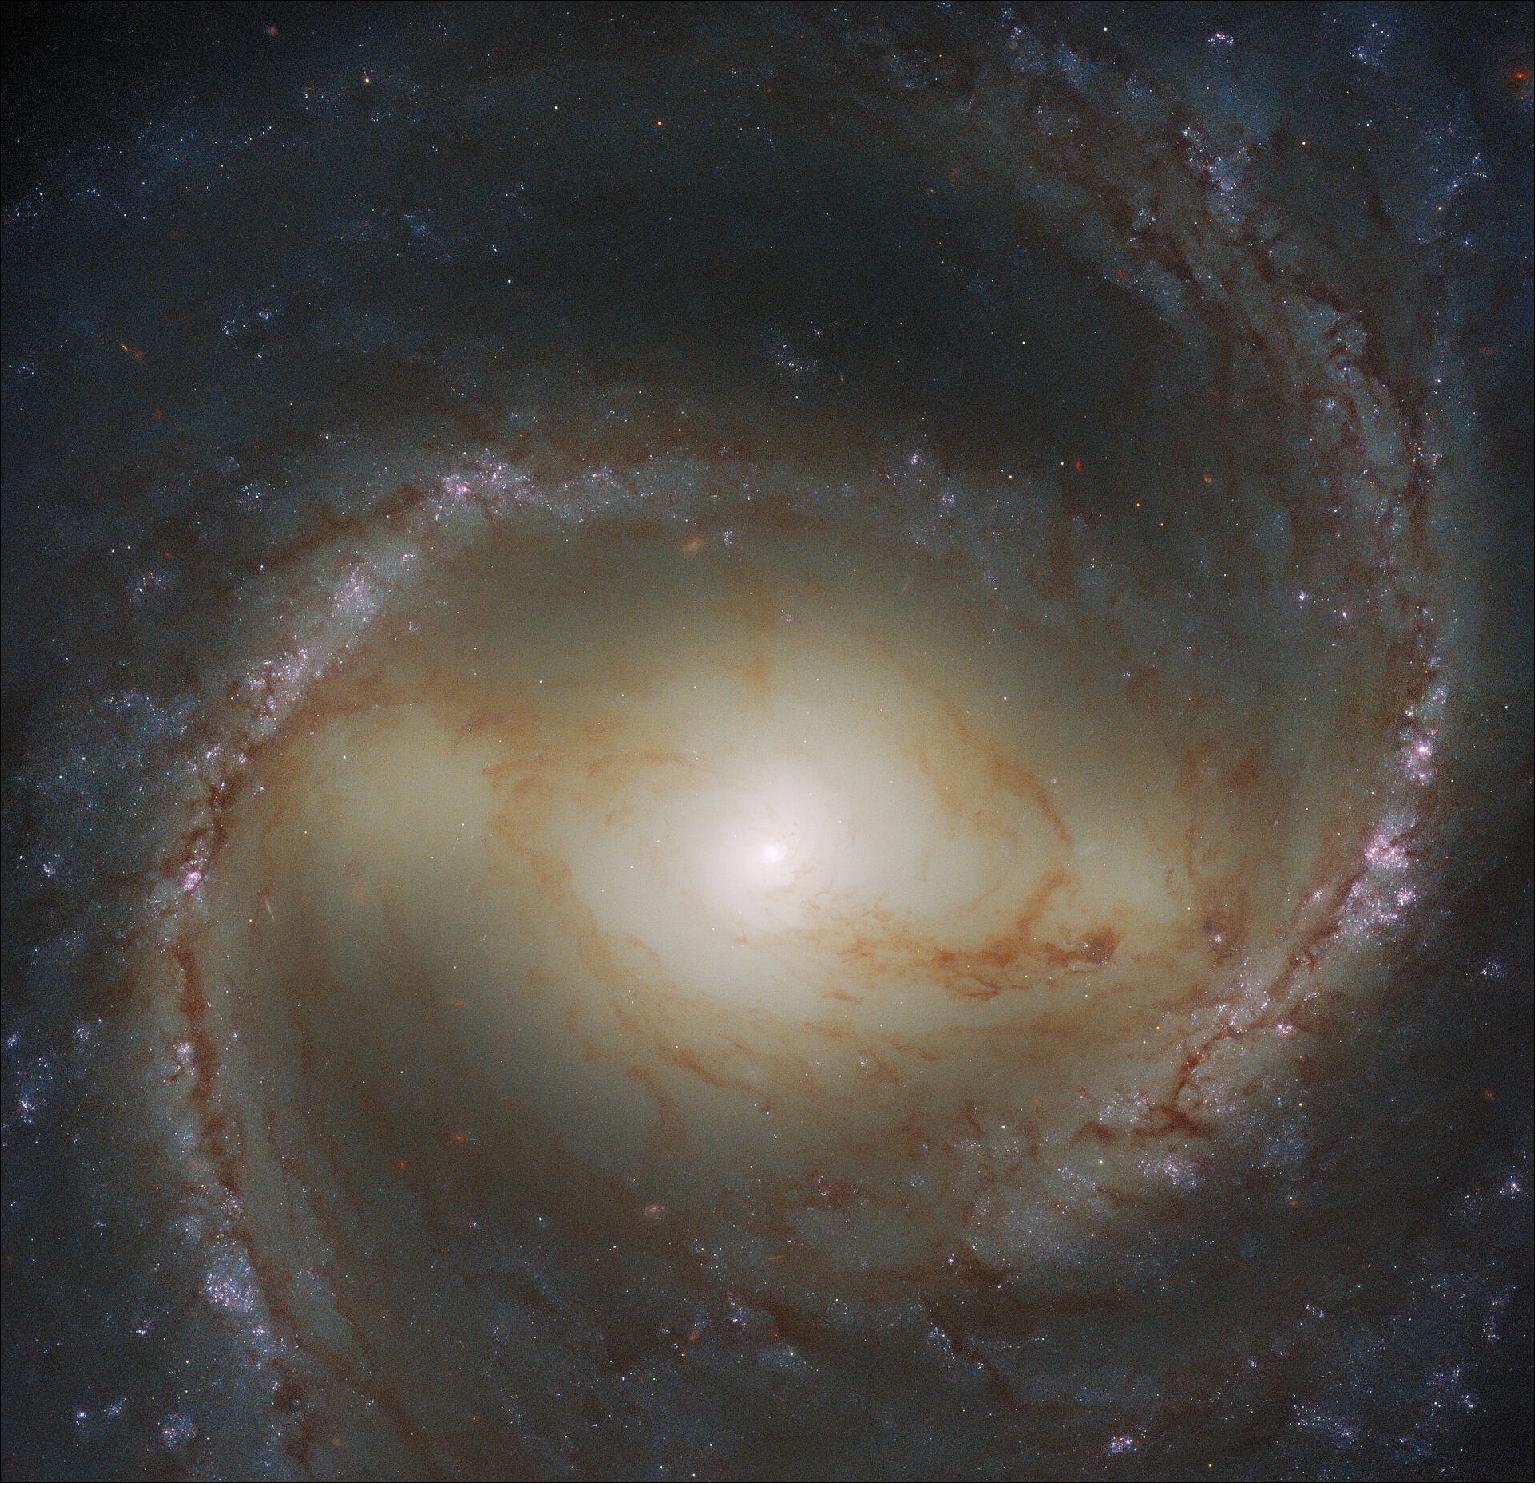 Figure 53: Whilst archival Hubble data allowed astronomers to weigh M91’s central black hole, more recent observations have had other scientific aims. This observation is part of an effort to build a treasure trove of astronomical data exploring the connections between young stars and the clouds of cold gas in which they form. To do this, astronomers used Hubble to obtain ultraviolet and visible observations of galaxies already seen at radio wavelengths by the ground-based Atacama Large Millimeter/submillimeter Array (ALMA), image credit: ESA/Hubble & NASA, J. Lee and the PHANGS-HST Team; CC BY 4.0